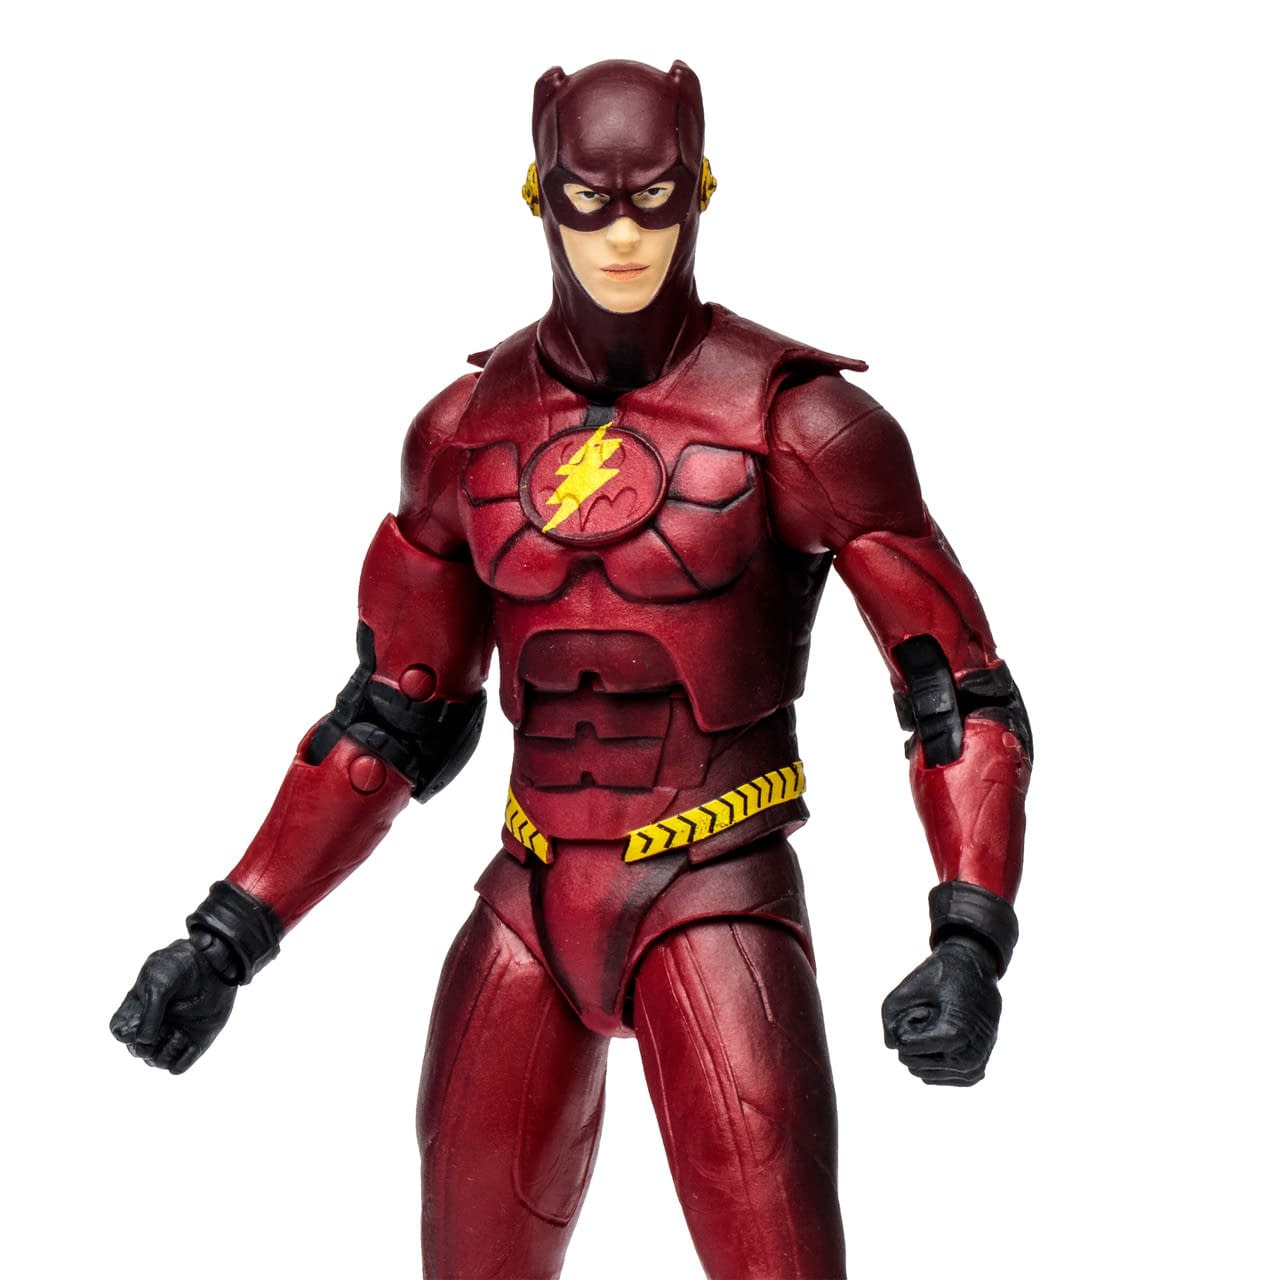 McFarlane Toys Reveals Multiple Flash Figures from The Flash 